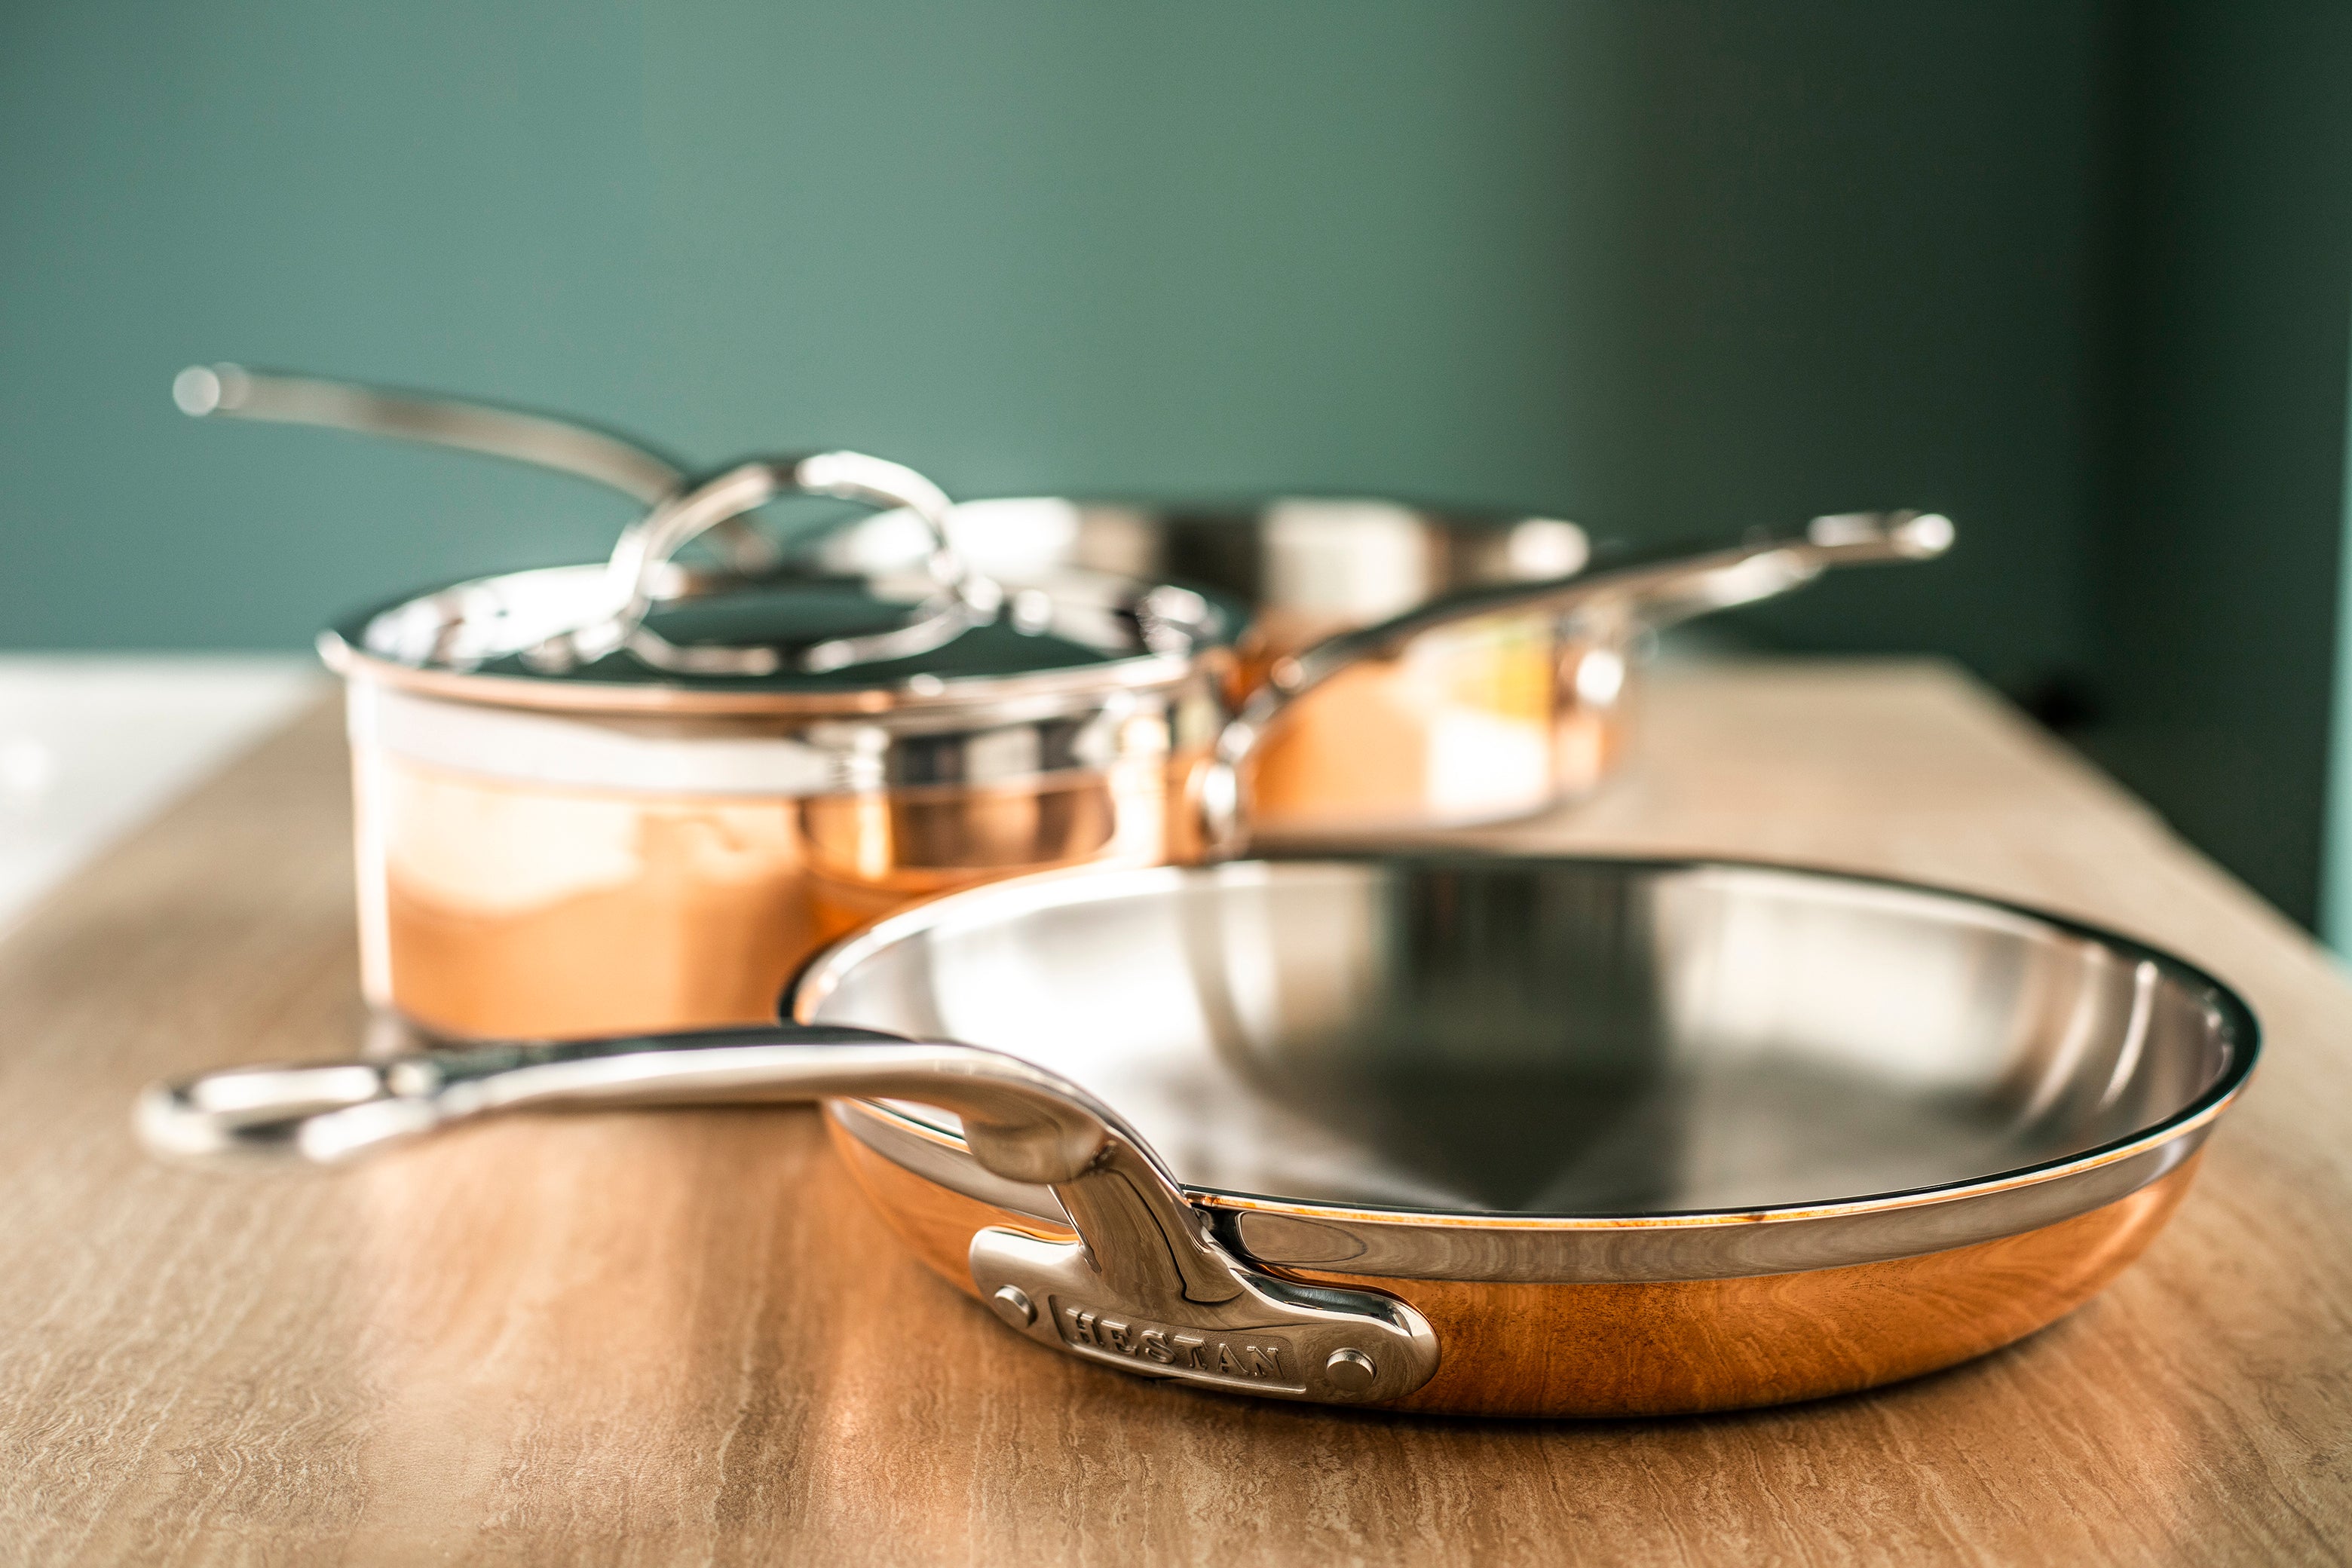 copperbond products from hestan